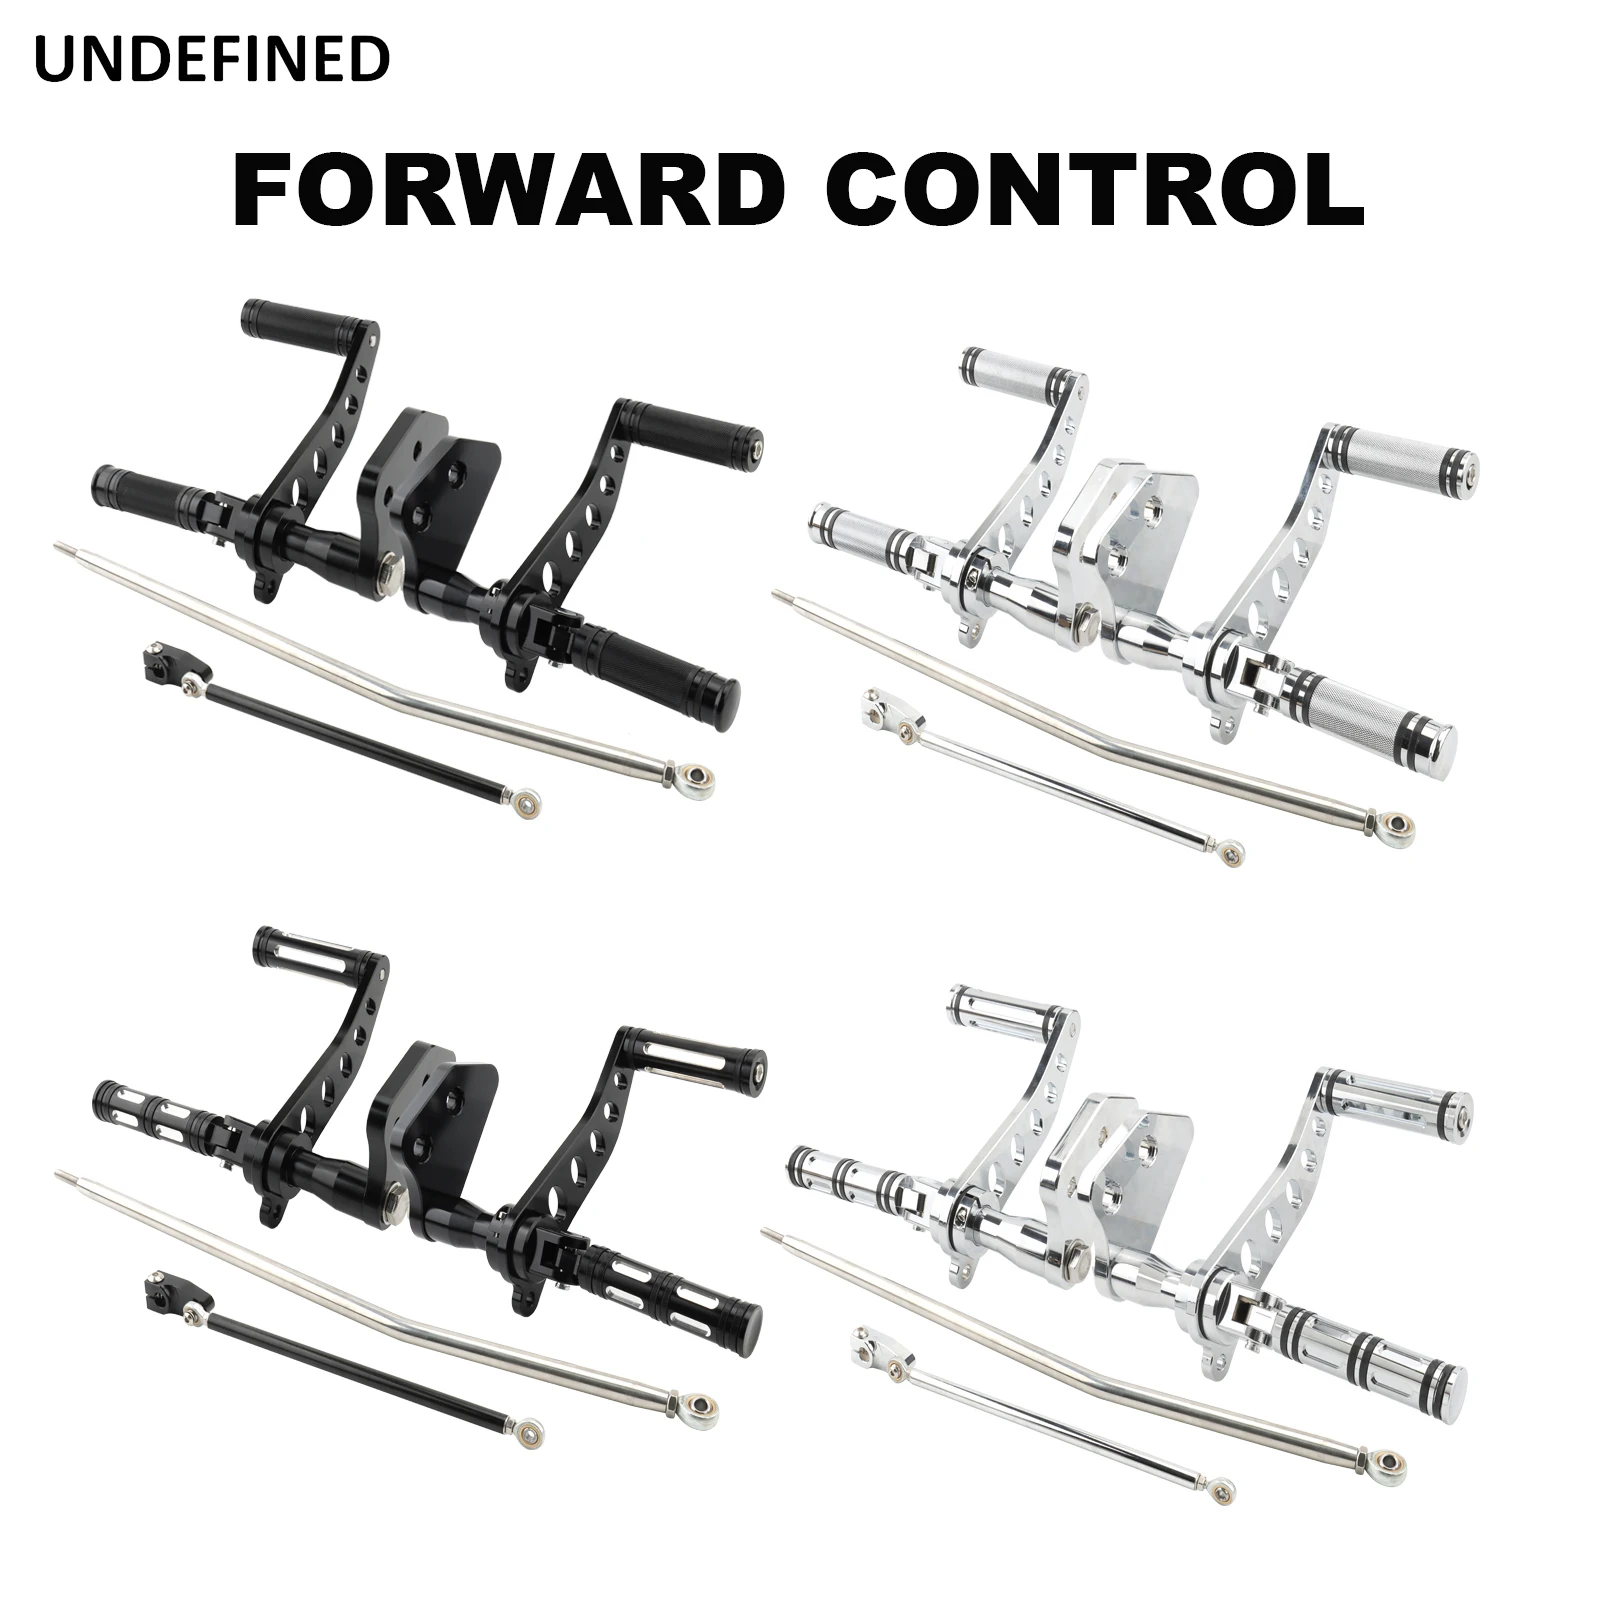 

Forward Controls Foot Pegs Kit For Harley Dyna Street Bob FXDB 2006-2017 Low Rider FXDL 2000-2012 Super Glide FXD 2000-2015